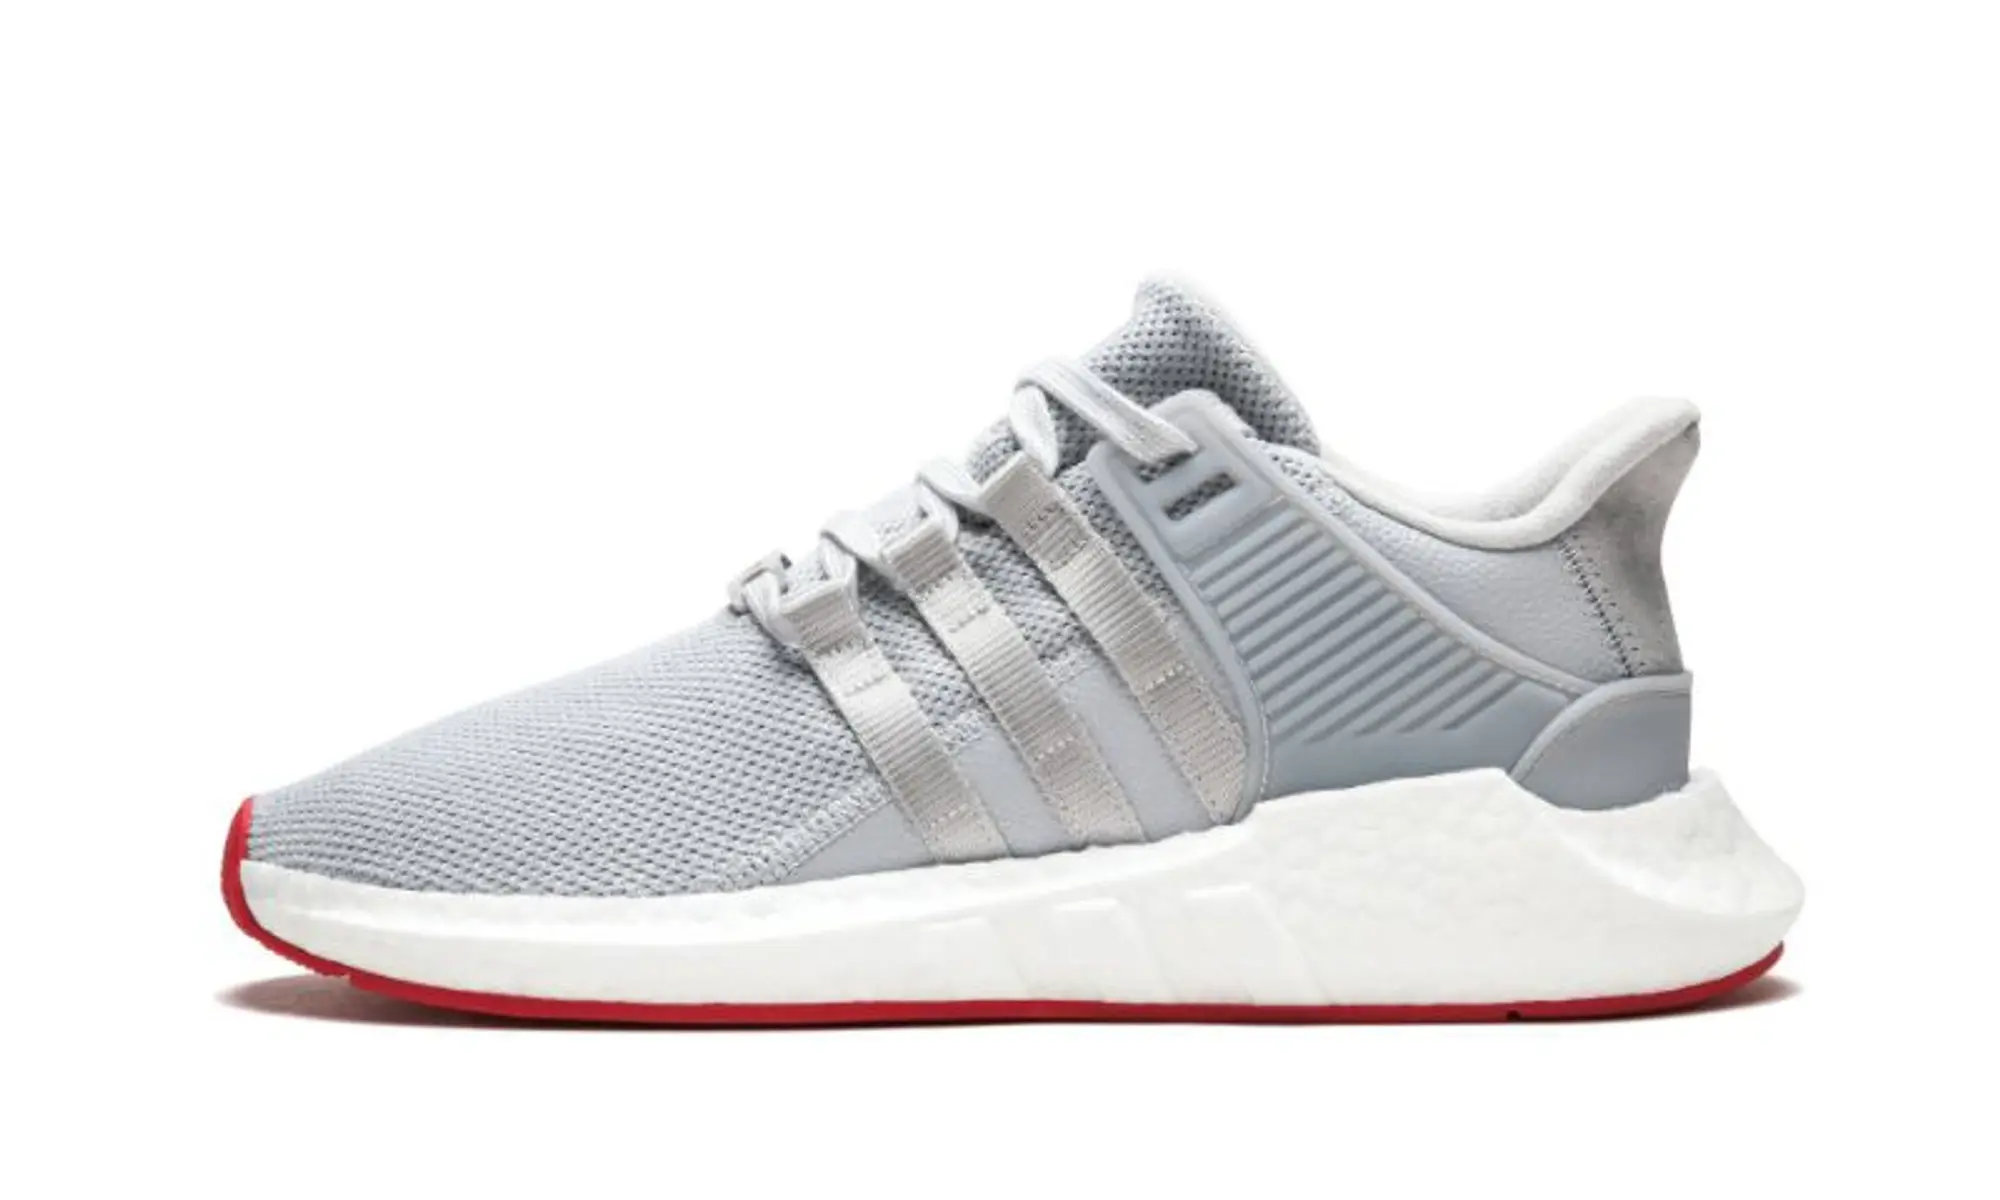 adidas EQT Support 93/17 Shoes